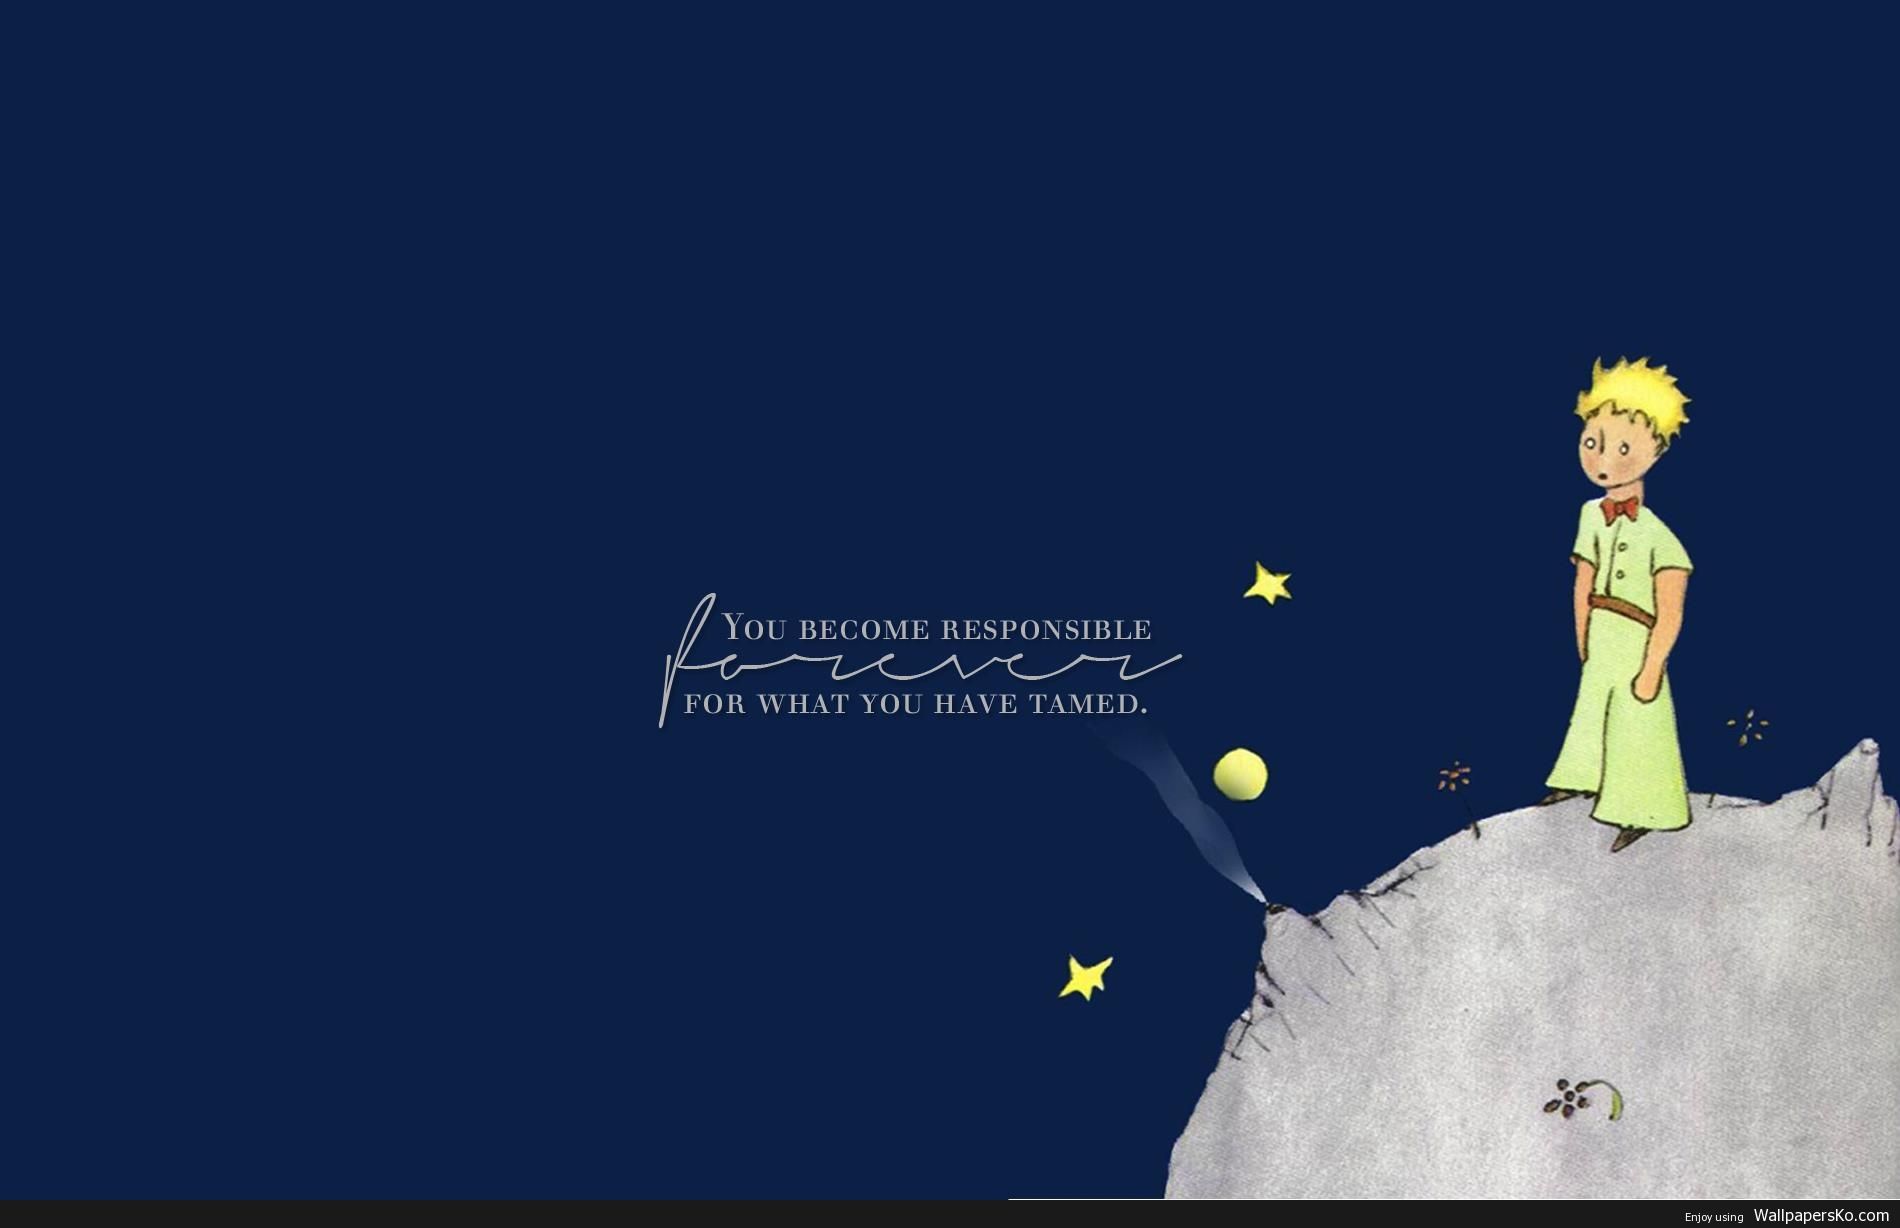 The Little Prince Wallpaper HD /the Little Prince Wallpaper Hd HD Wallpape. Little Prince Quotes, The Little Prince, Book Wallpaper